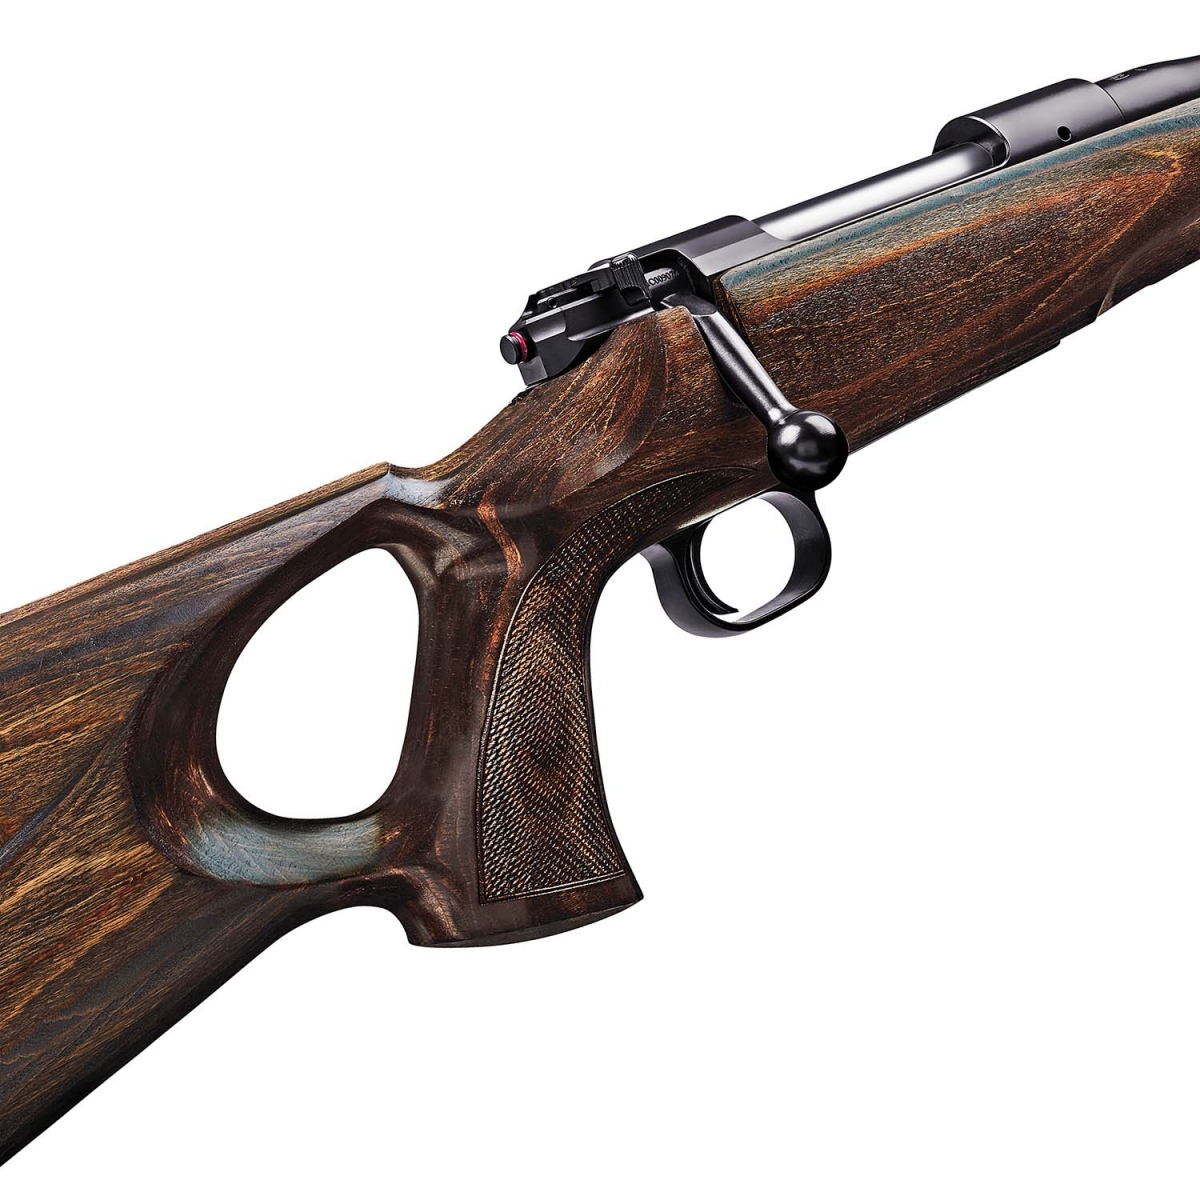 The thumbhole pistol grip design of the stock. The grips is finely checkered, while the large thumbhole allows a fast grip acquisition even with gloves, like in typical winter hunting conditions